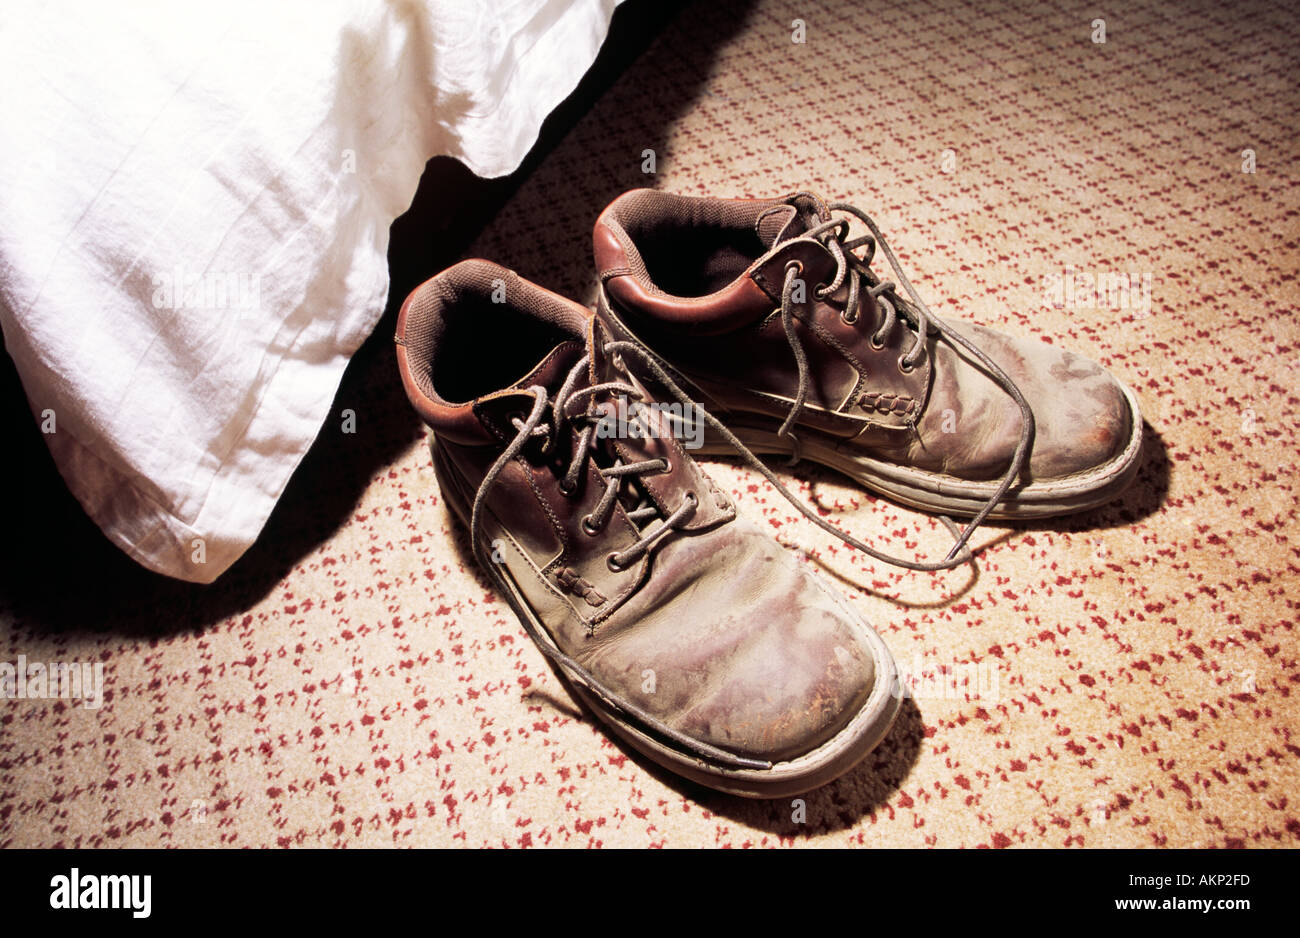 Pair of very dusty leather hiking boots with shoe lases undone on the carpet next to a bed Stock Photo